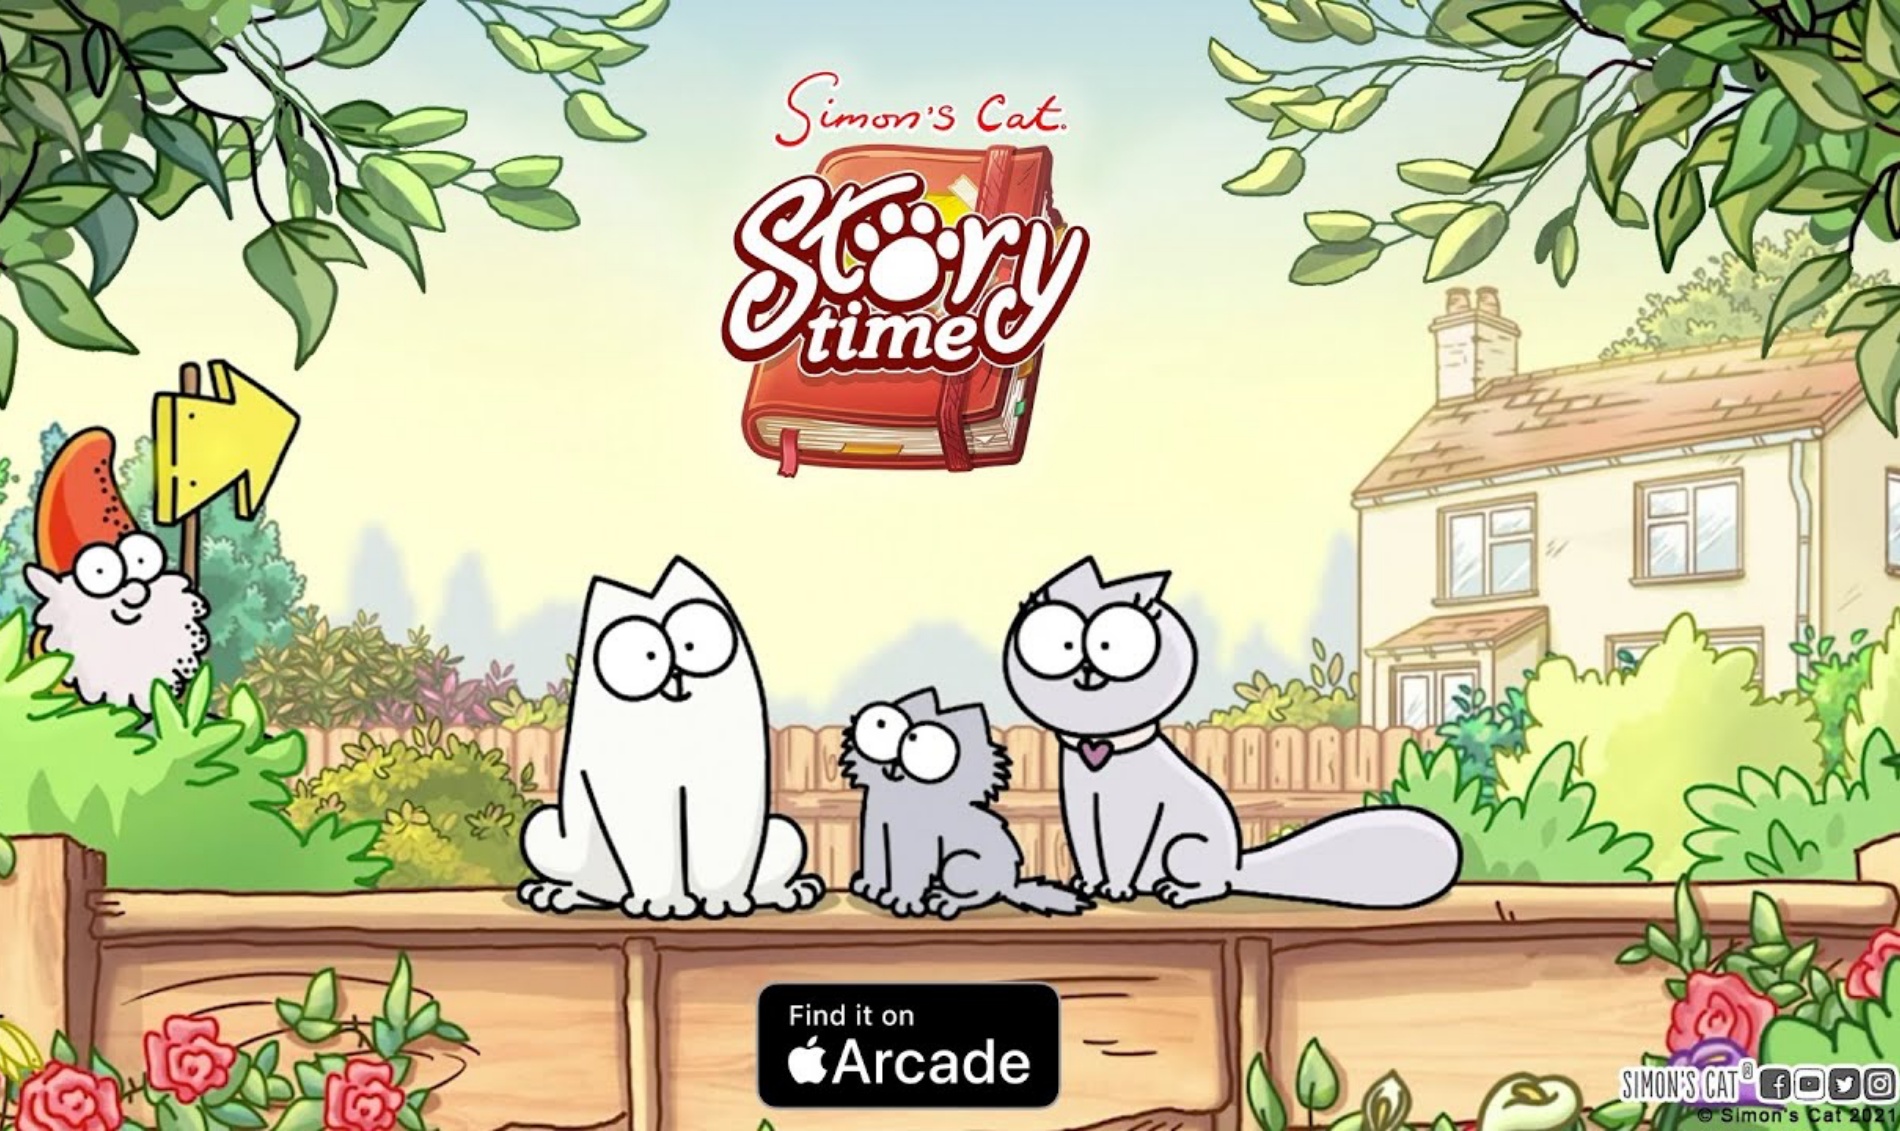 With 20 million downloads in its paws, Simon's Cat seeks more mobile games  - Tubefilter